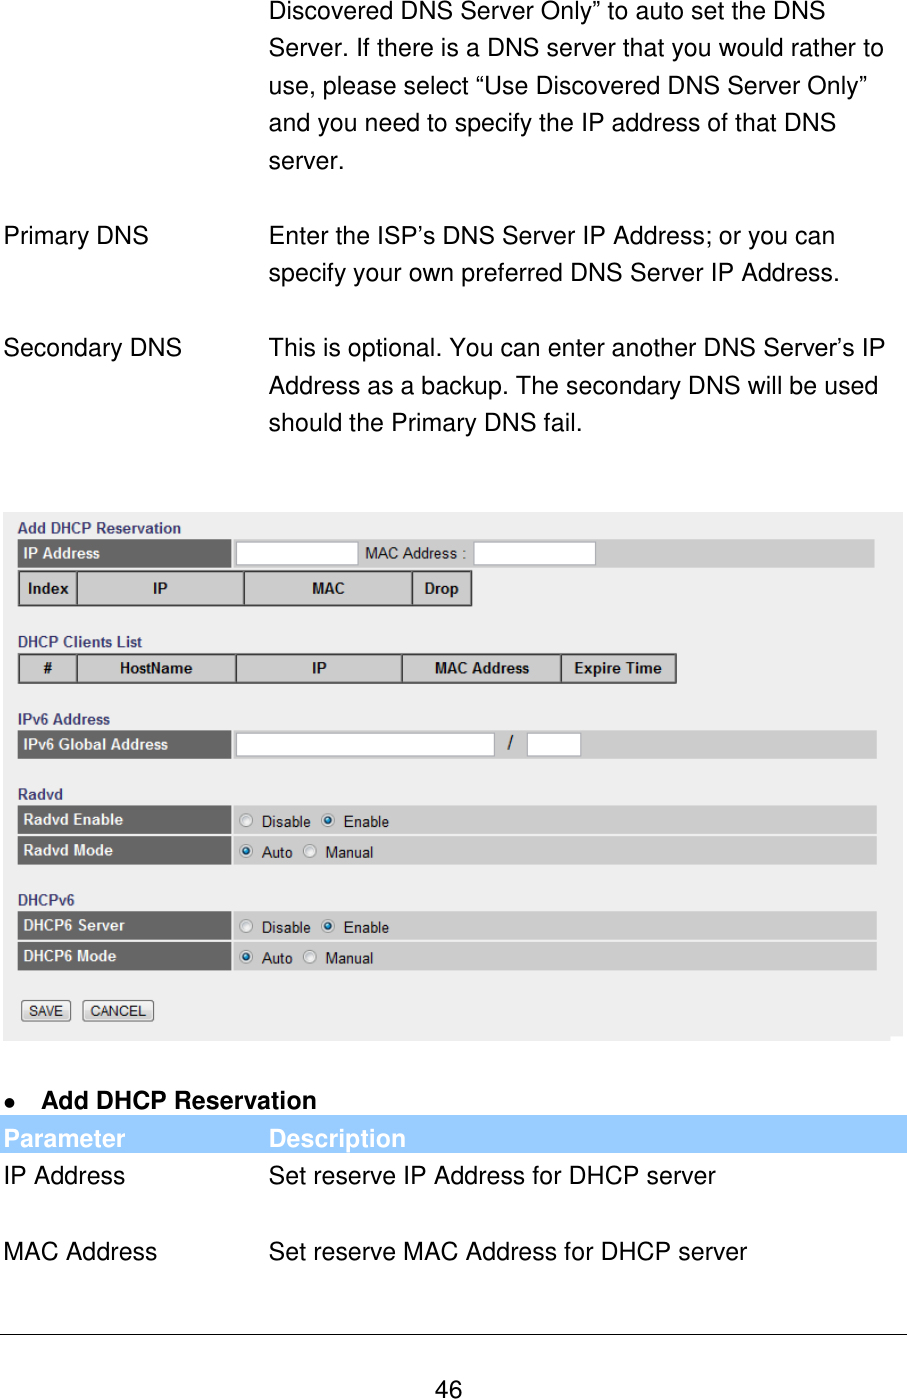   46 Discovered DNS Server Only” to auto set the DNS Server. If there is a DNS server that you would rather to use, please select “Use Discovered DNS Server Only” and you need to specify the IP address of that DNS server.   Primary DNS Enter the ISP‟s DNS Server IP Address; or you can specify your own preferred DNS Server IP Address.   Secondary DNS This is optional. You can enter another DNS Server‟s IP Address as a backup. The secondary DNS will be used should the Primary DNS fail.      Add DHCP Reservation Parameter Description IP Address Set reserve IP Address for DHCP server   MAC Address Set reserve MAC Address for DHCP server   